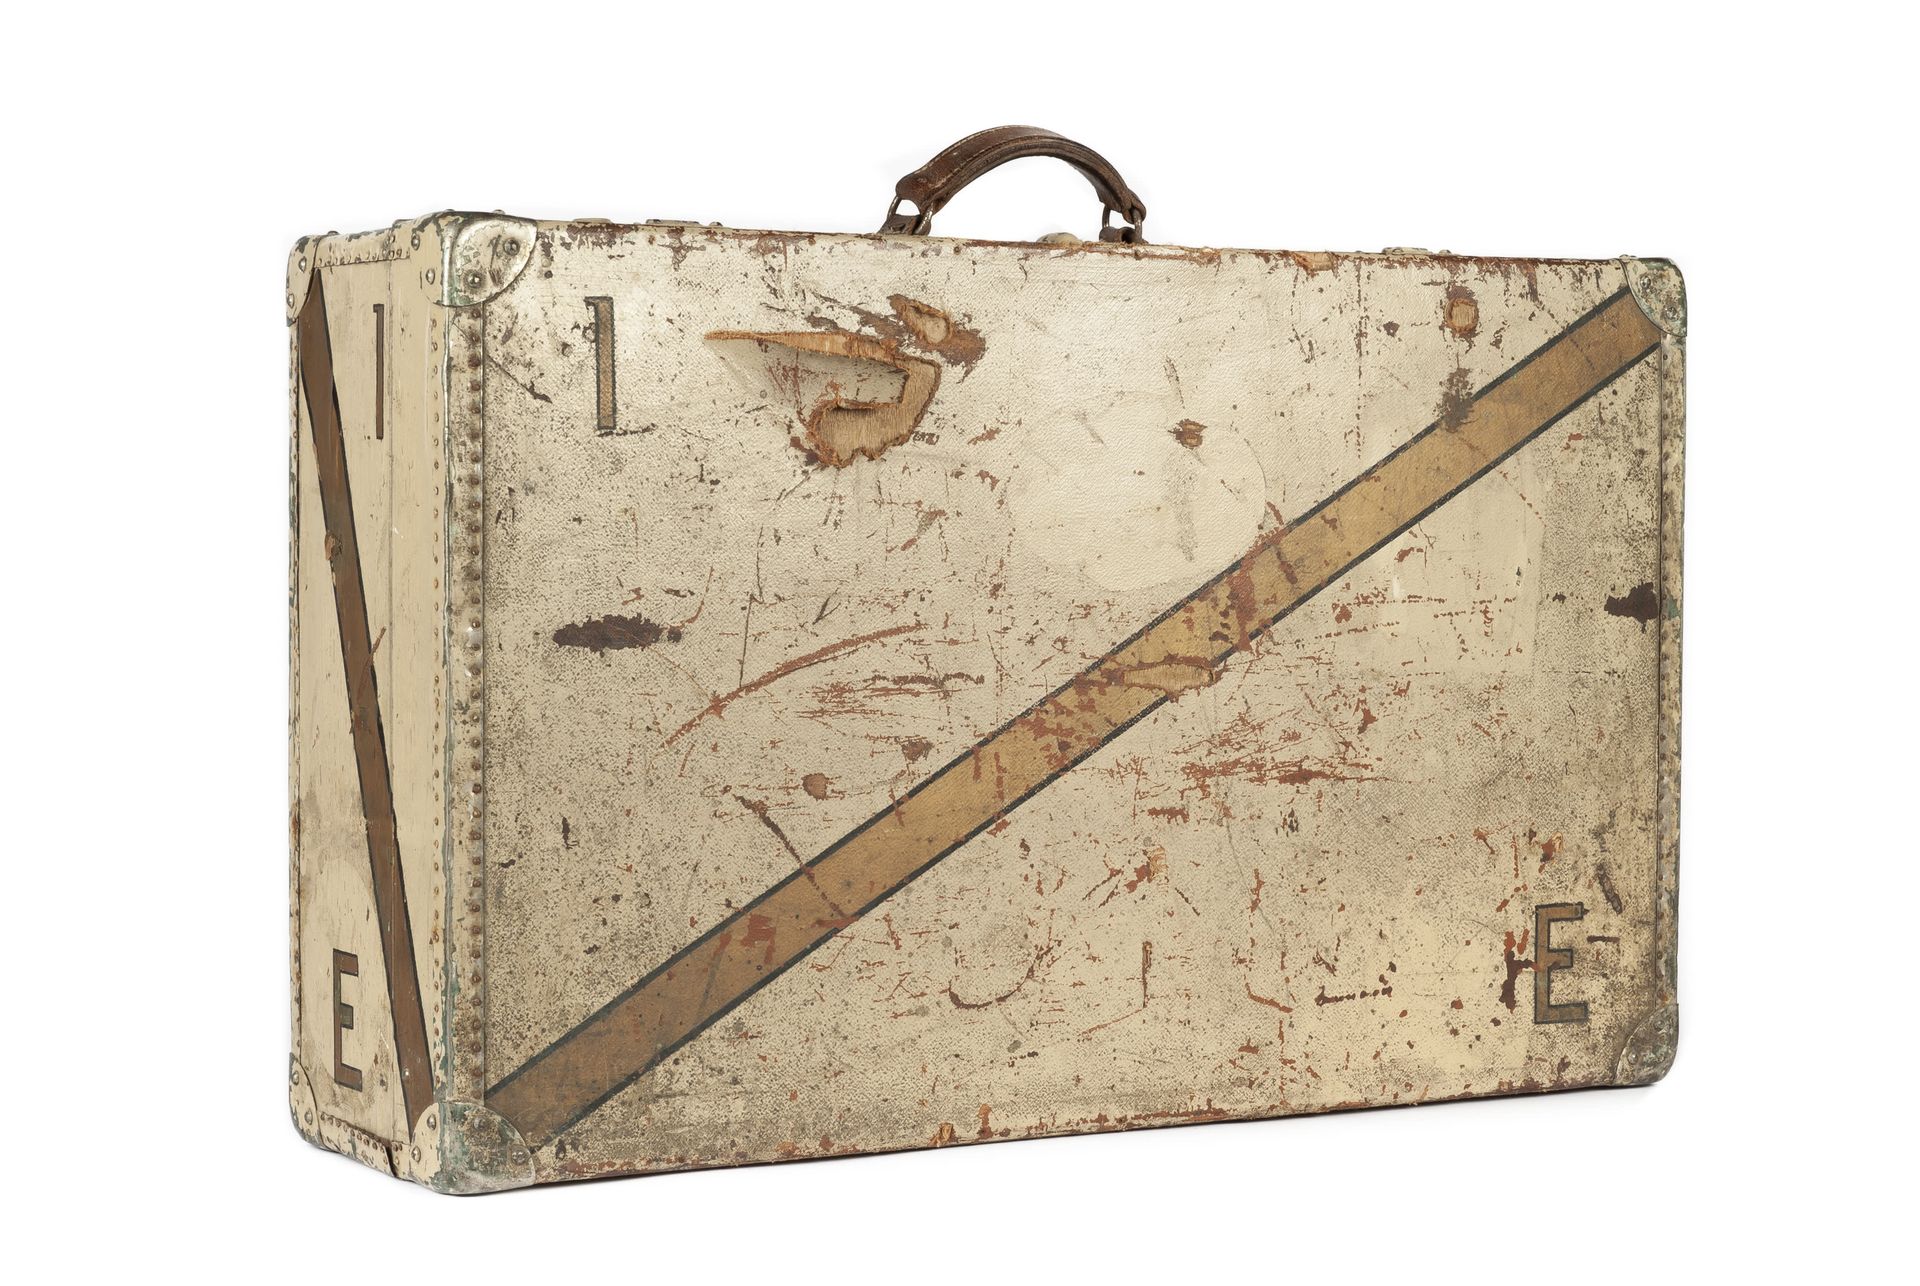 LOUIS VUITTON Period suitcase, canvas coated and painted in the colors of the ye&hellip;